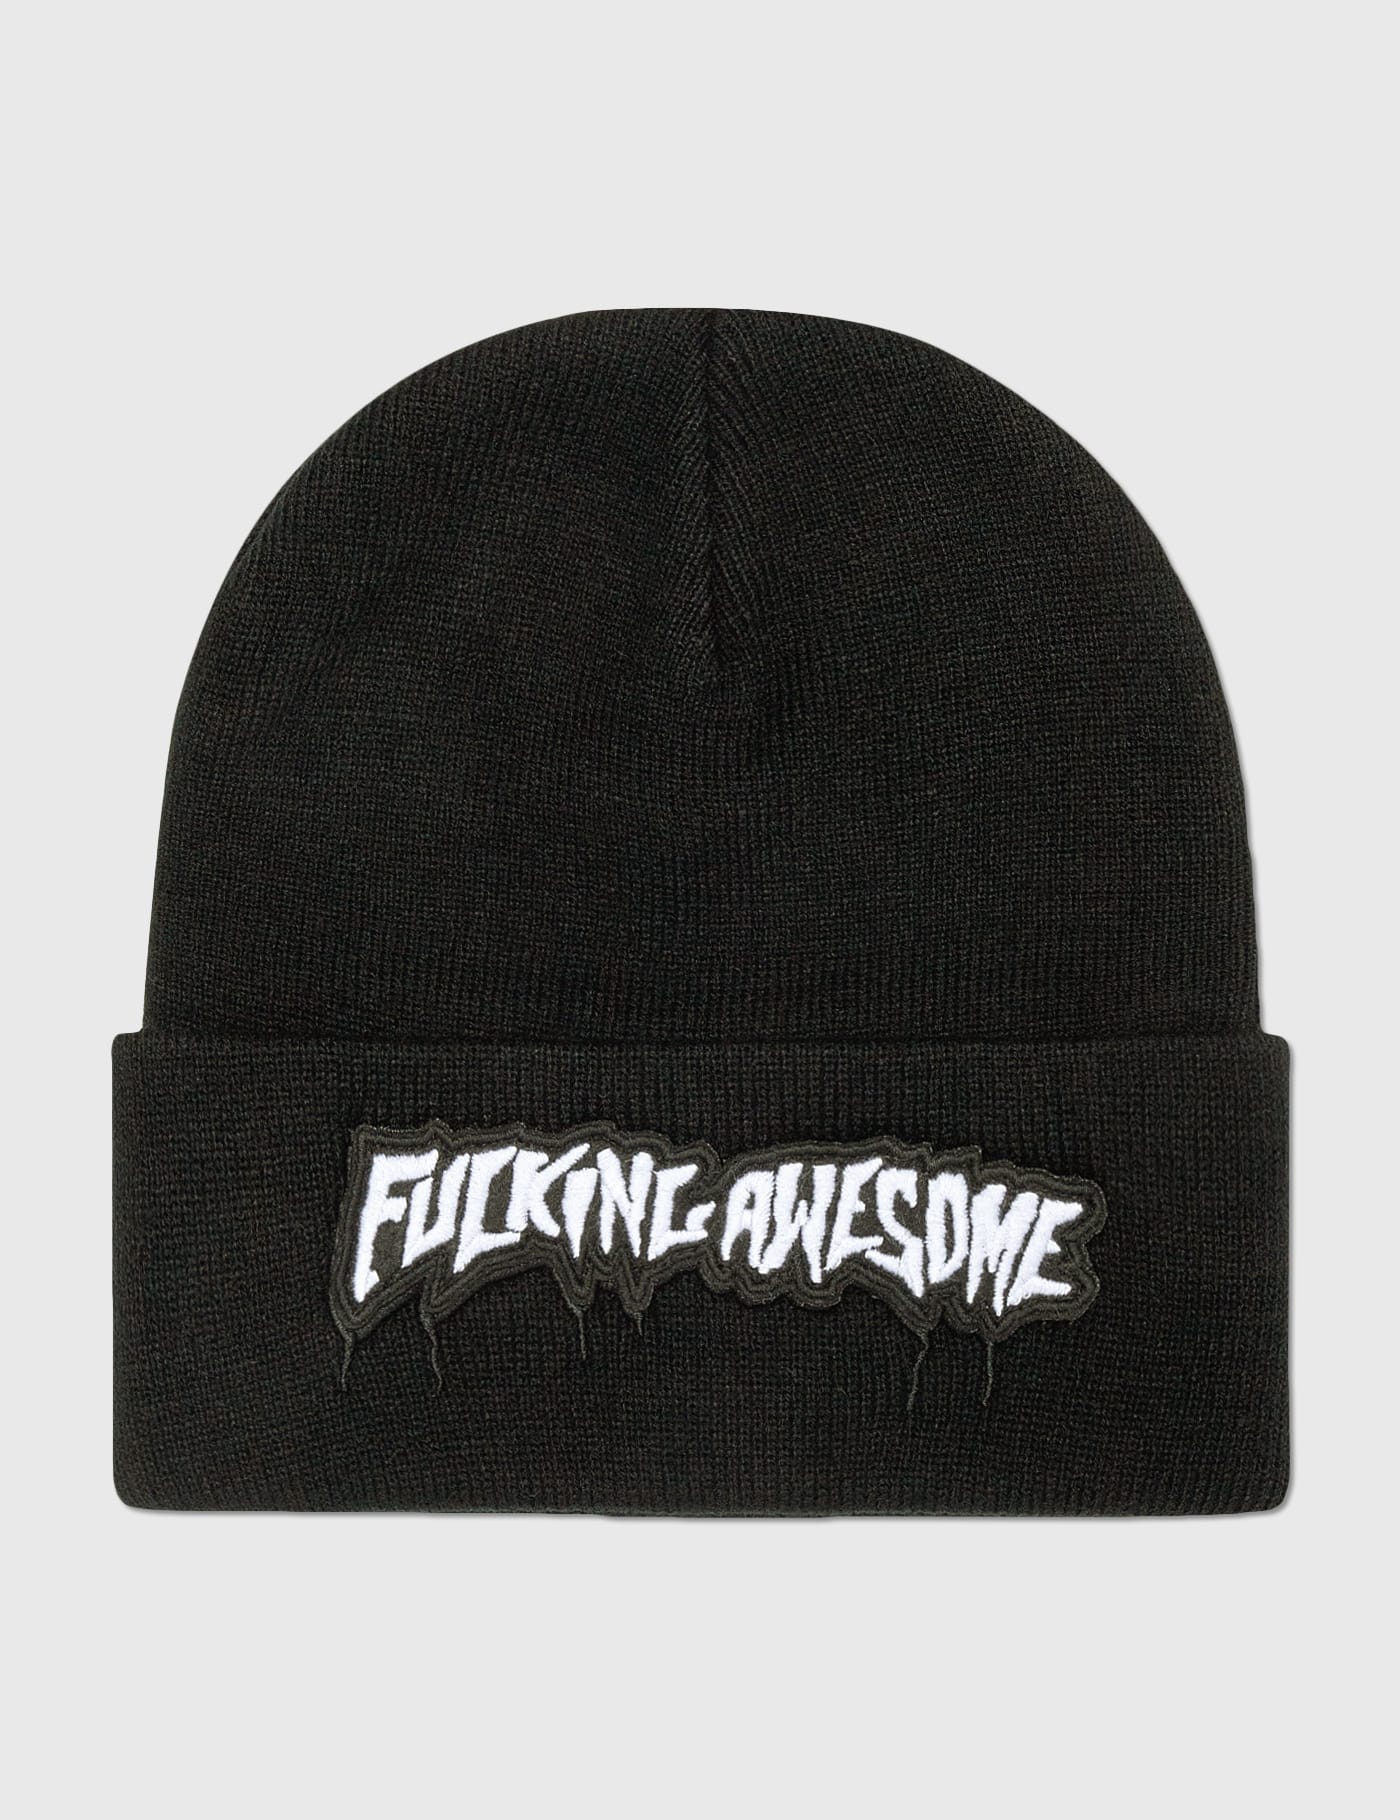 Fucking Awesome - Velcro Stamp Cuff Beanie | HBX - Globally